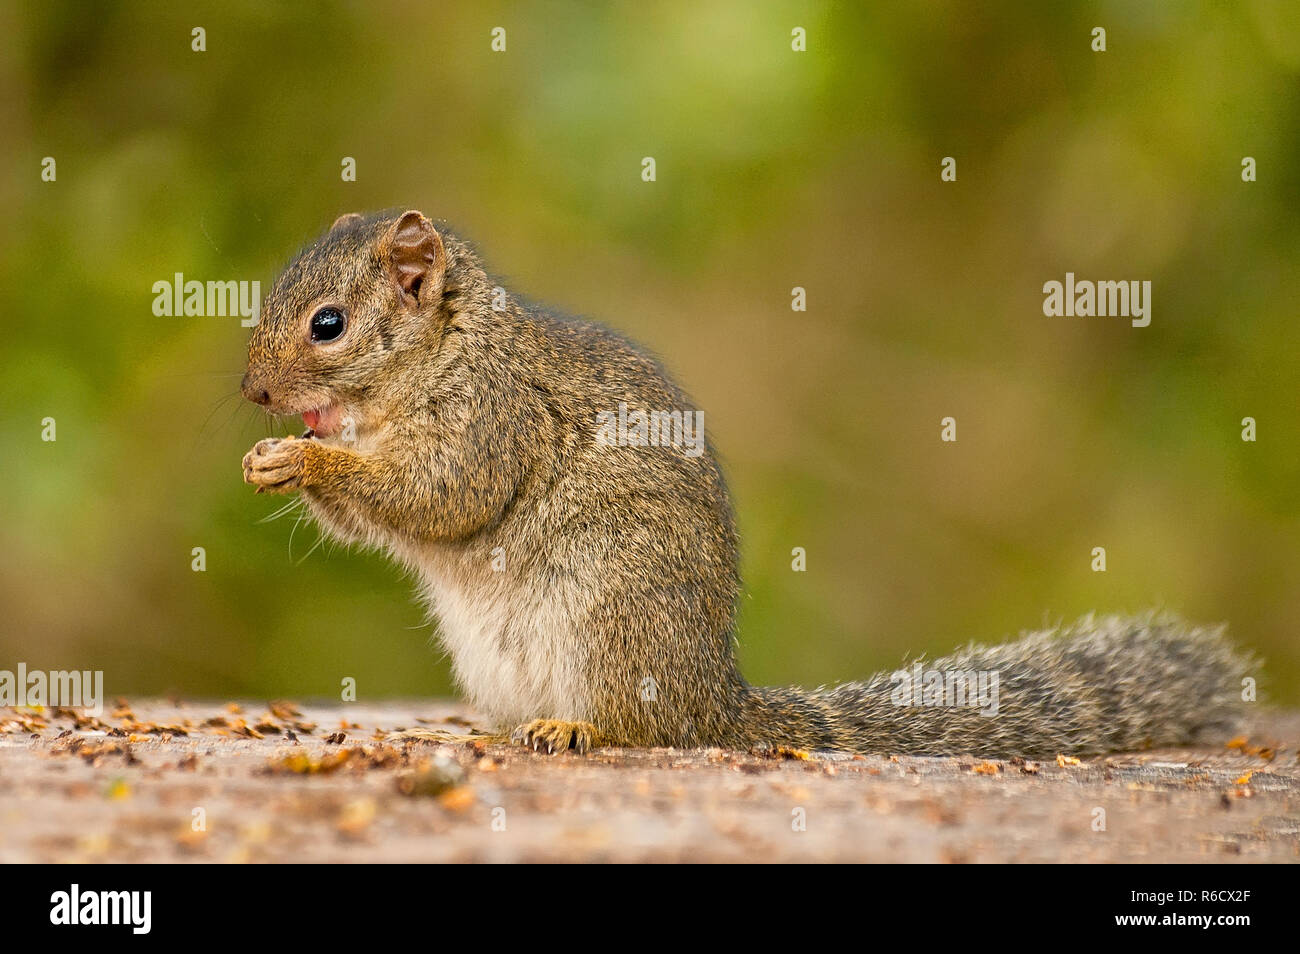 The African Bush Squirrels Are A Genus, Paraxerus, Squirrels Of The Subfamily Xerinae They Are Only Found In Africa Aberdare National Park, Kenya Stock Photo